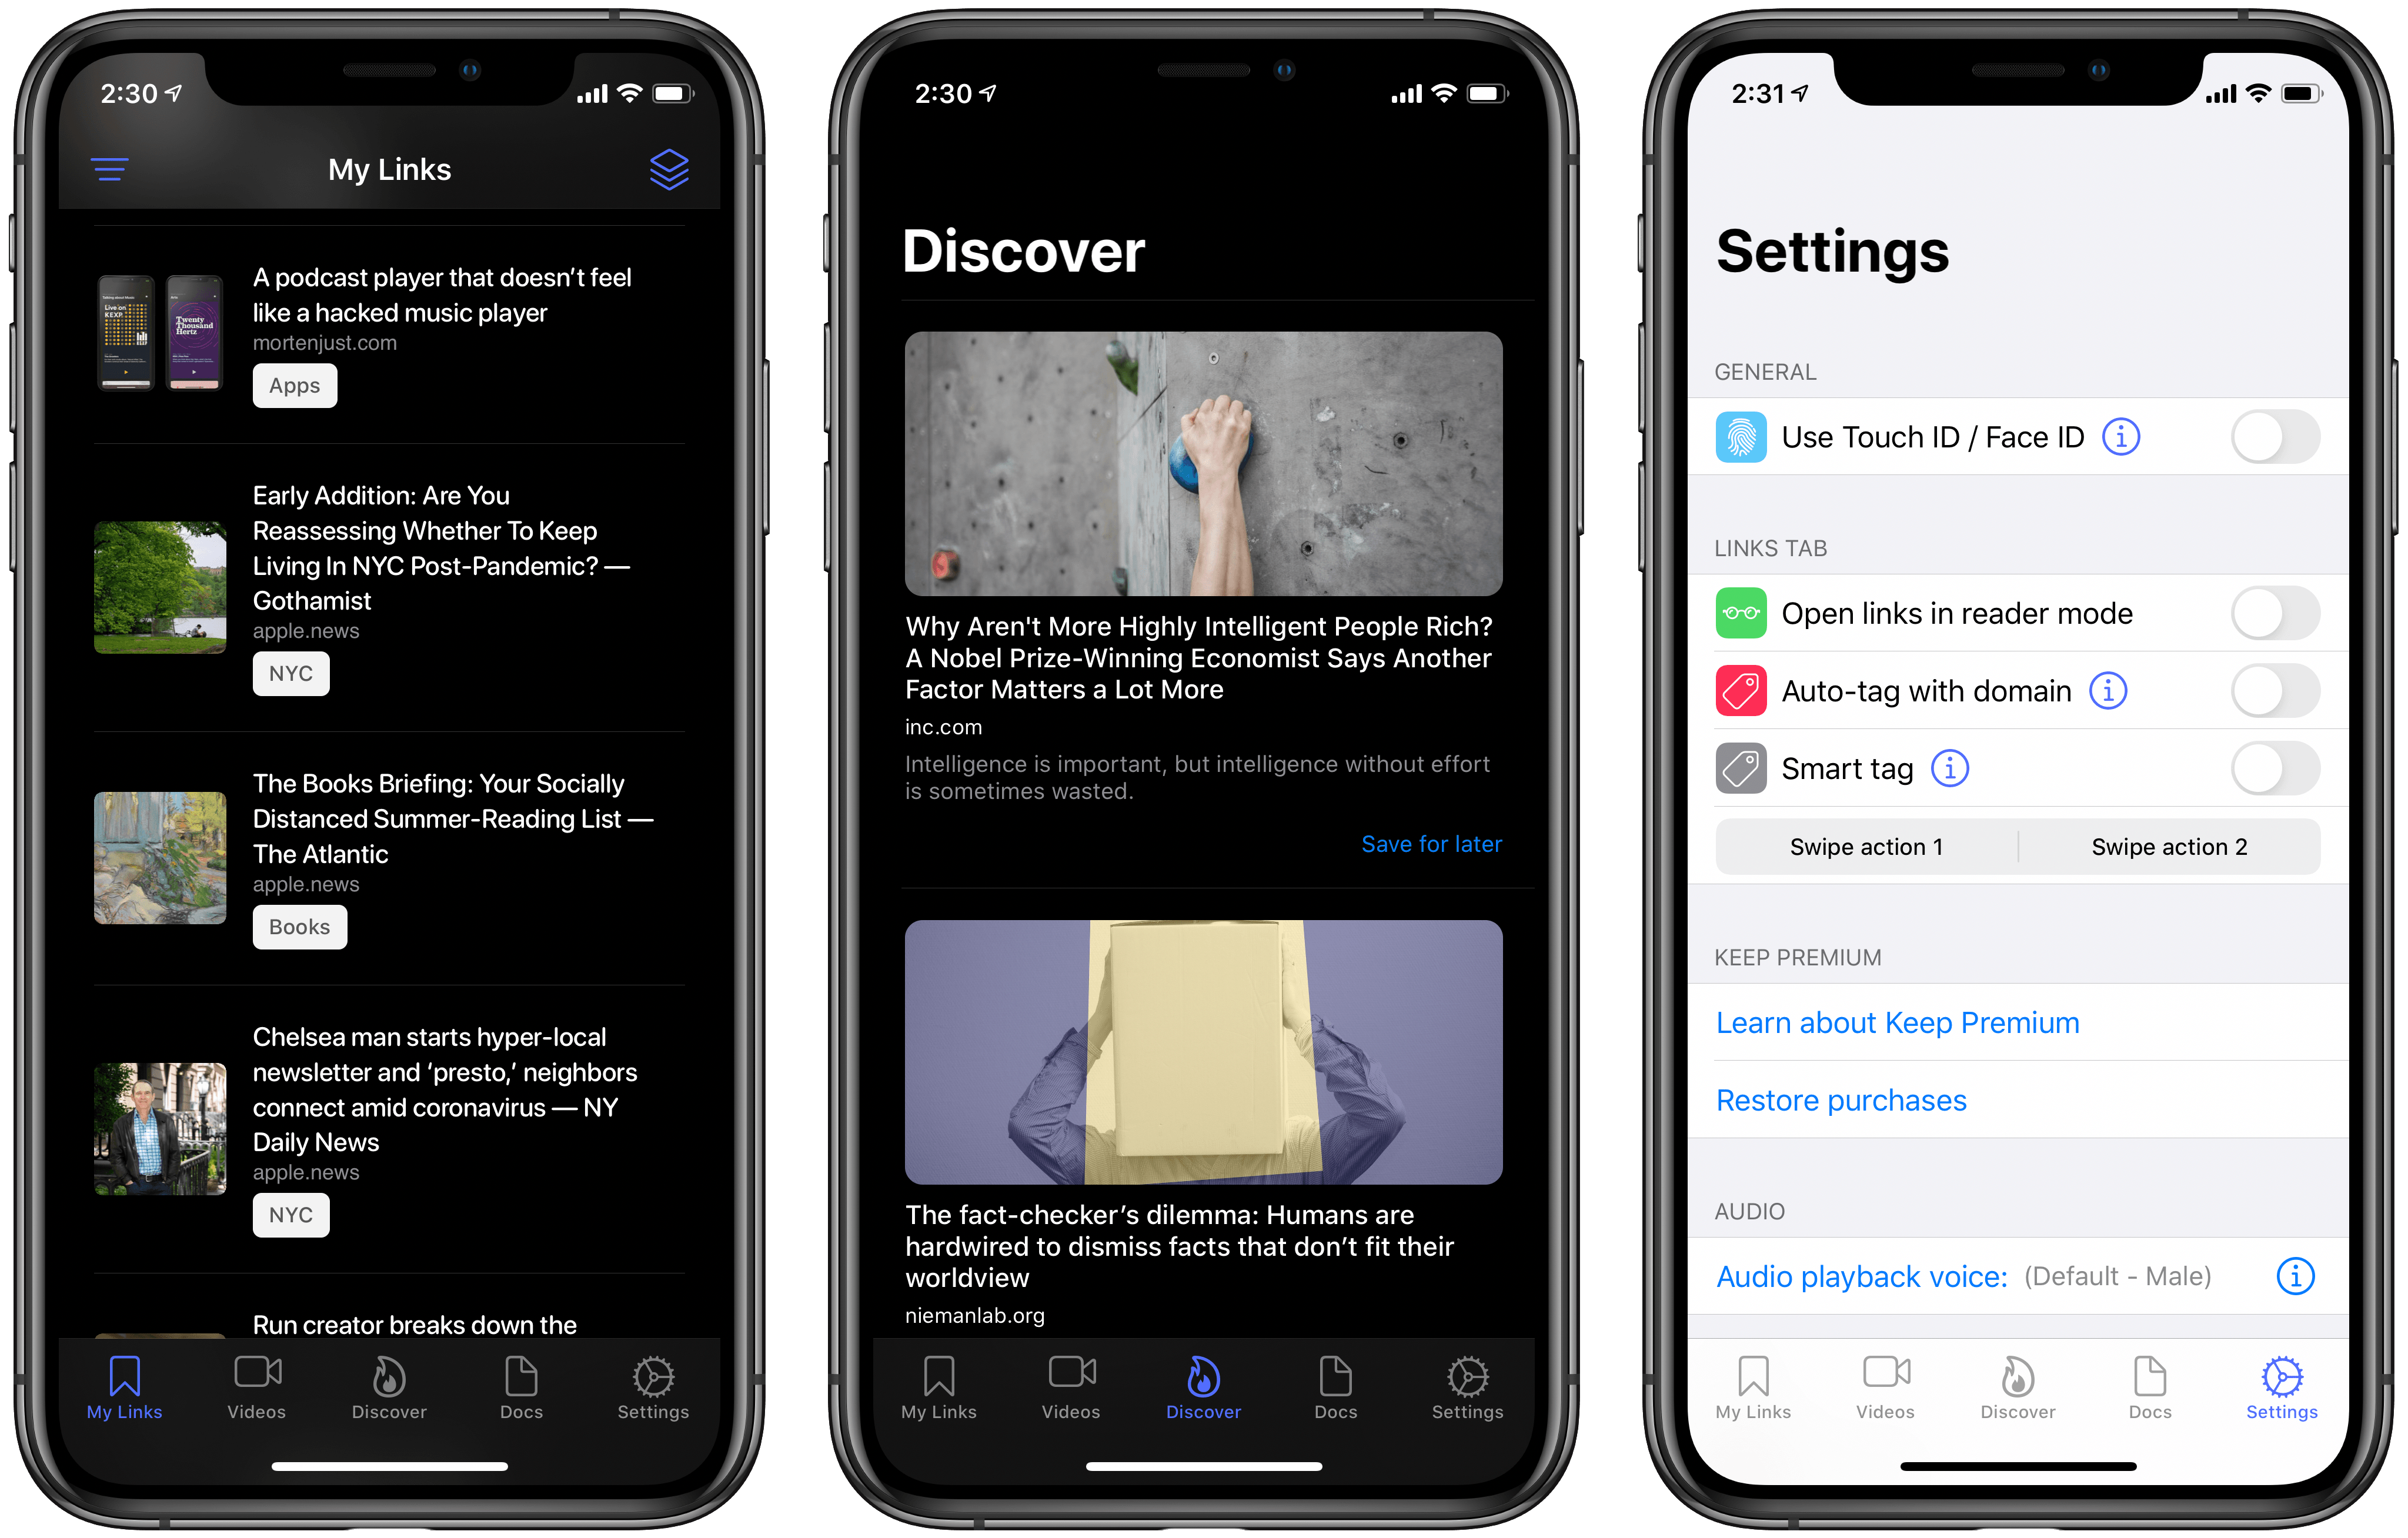 Dark mode, the Discover tab, and additional settings.